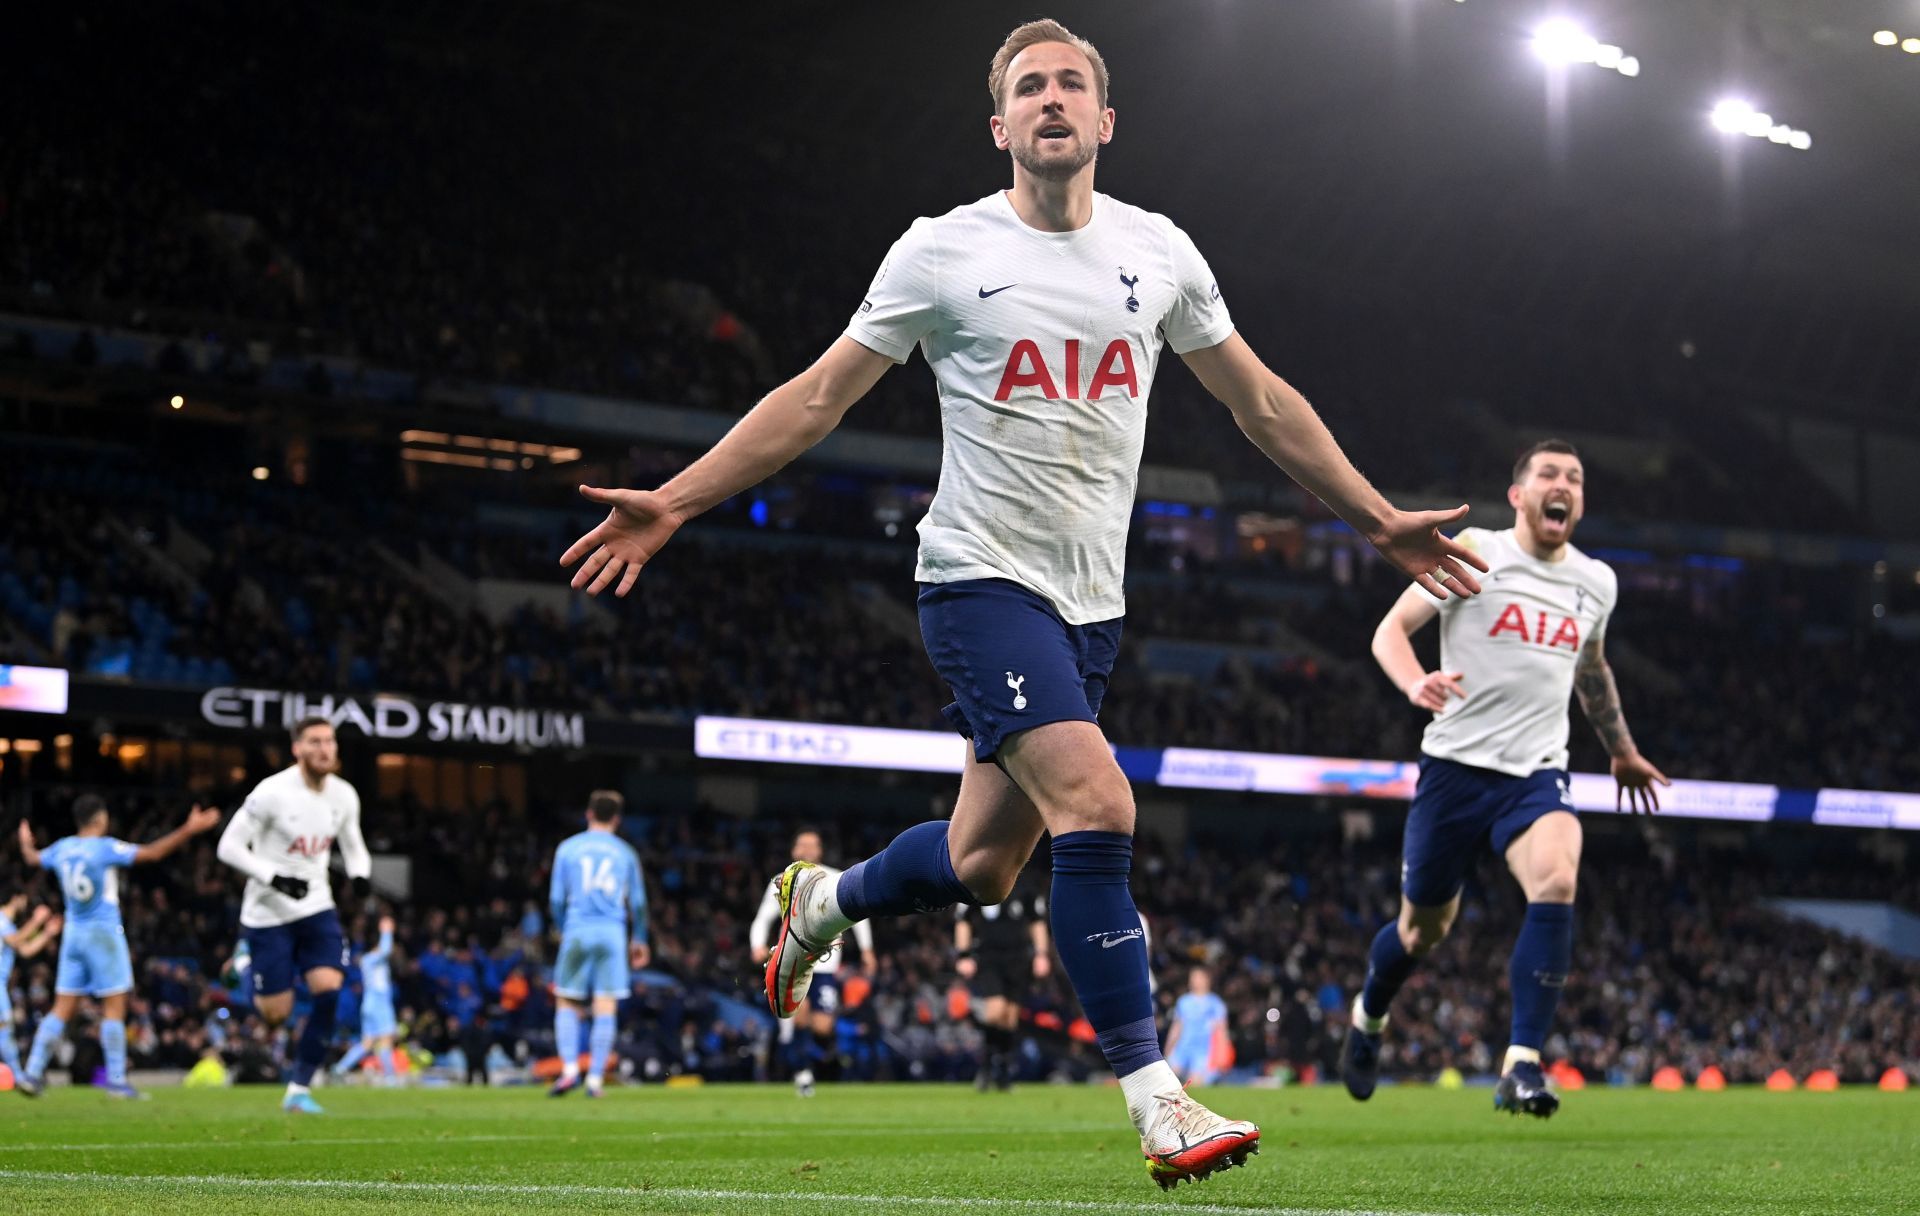 Manchester City and Tottenham Hotspur faced off in the Premier League on Saturday